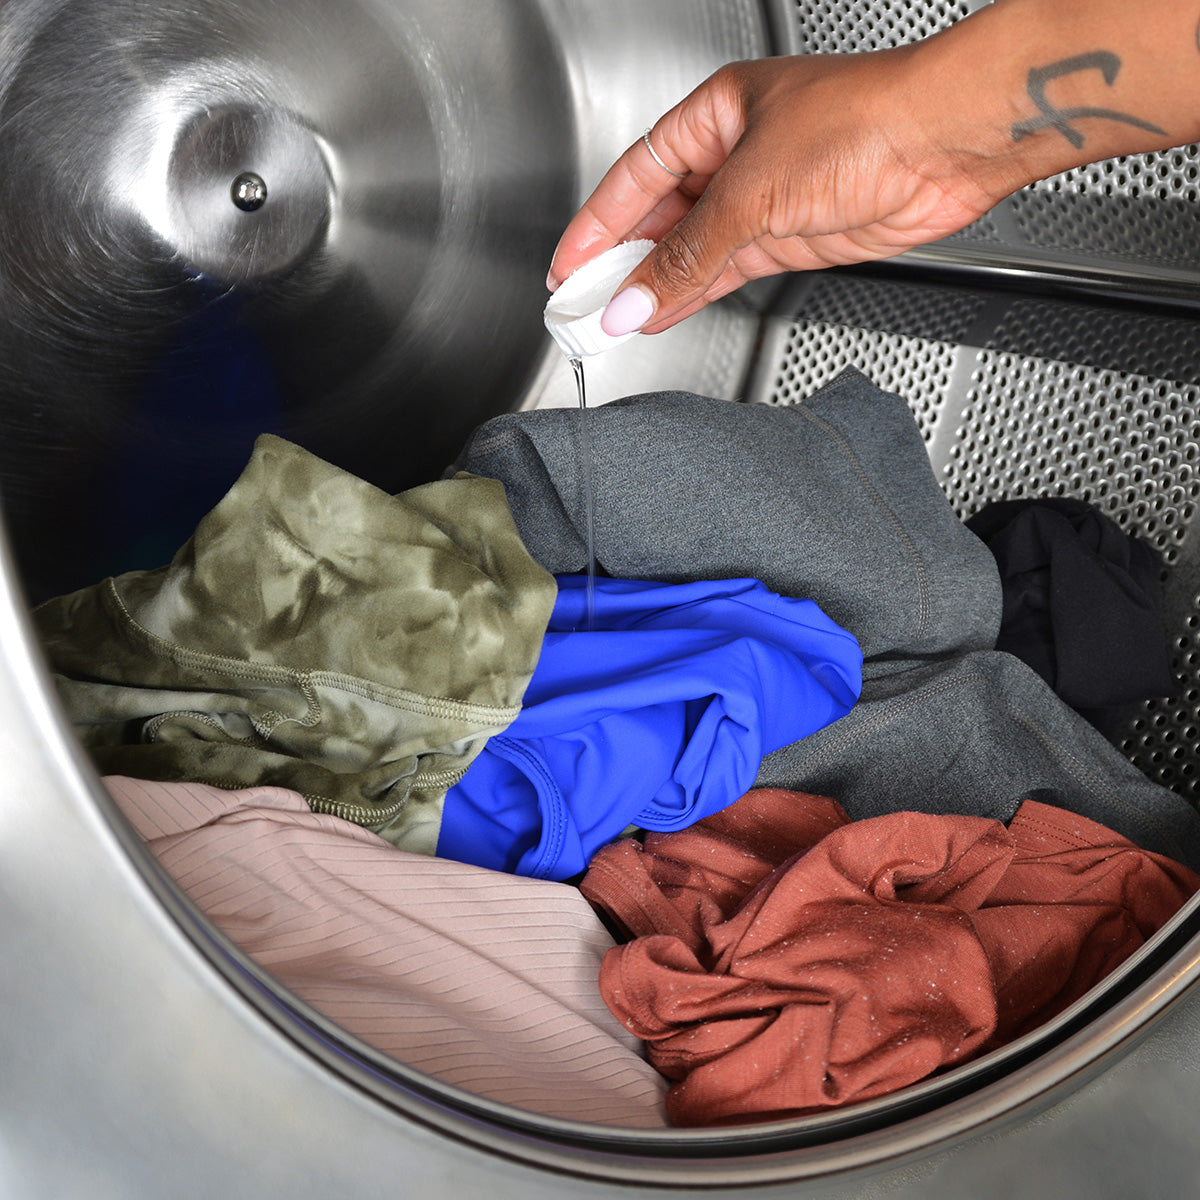 A hand pours a cap full of liquid detergent into the drum of a washing machine filled with sportswear